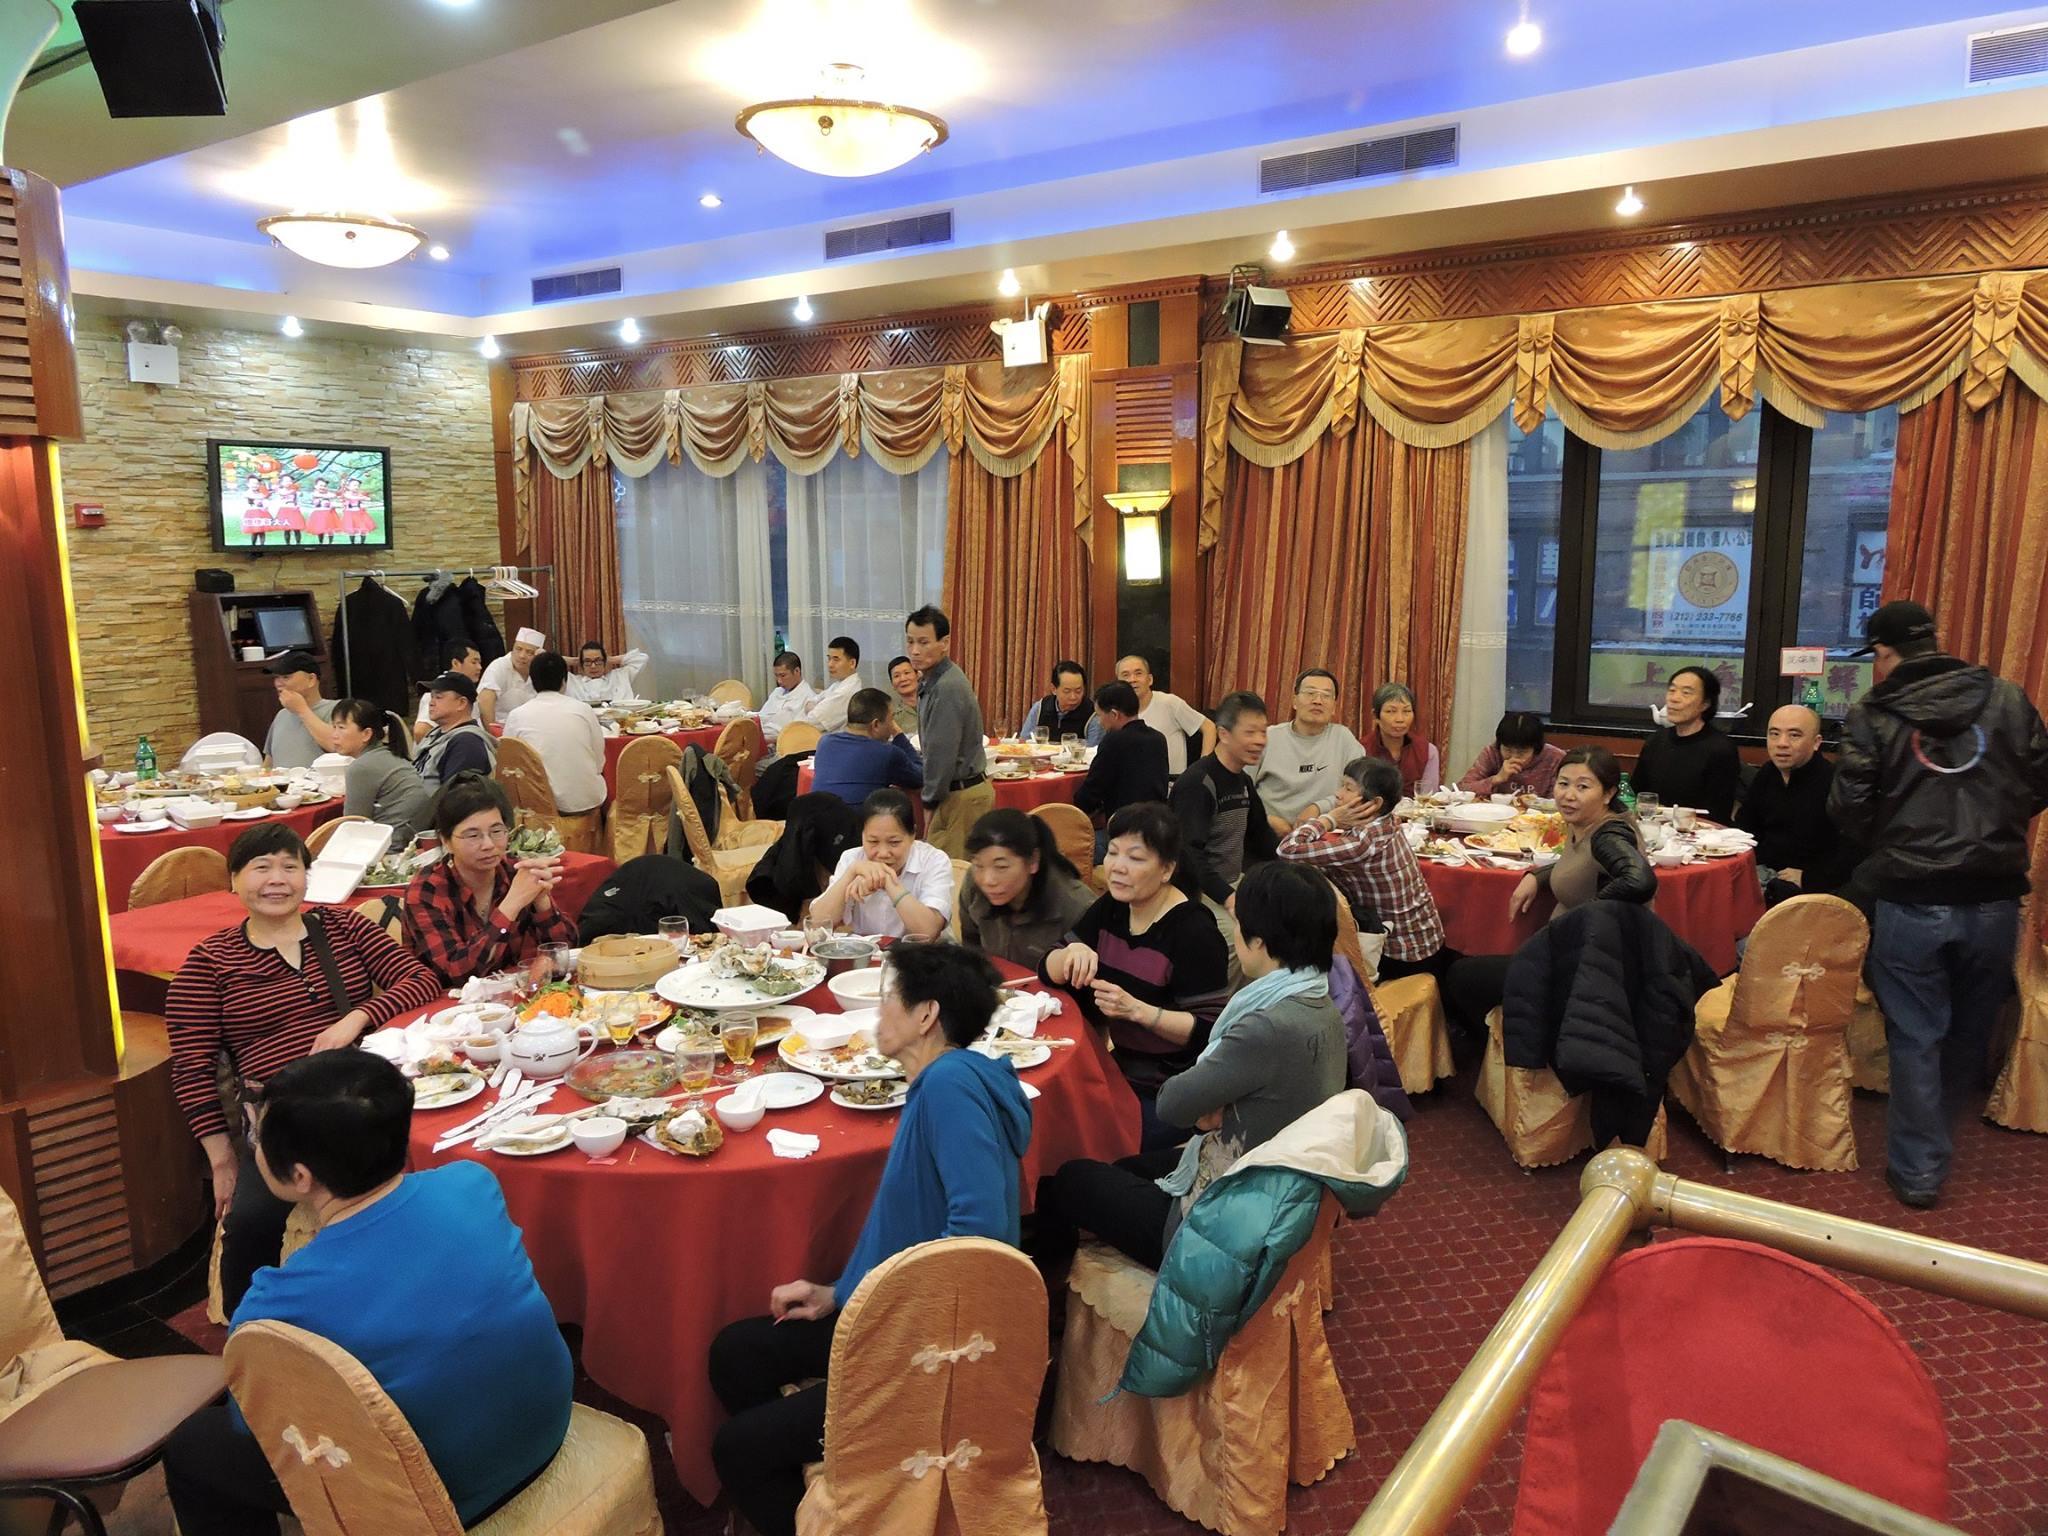 The chaotic banquet hall at Golden Unicorn in Manhattan's Chinatown